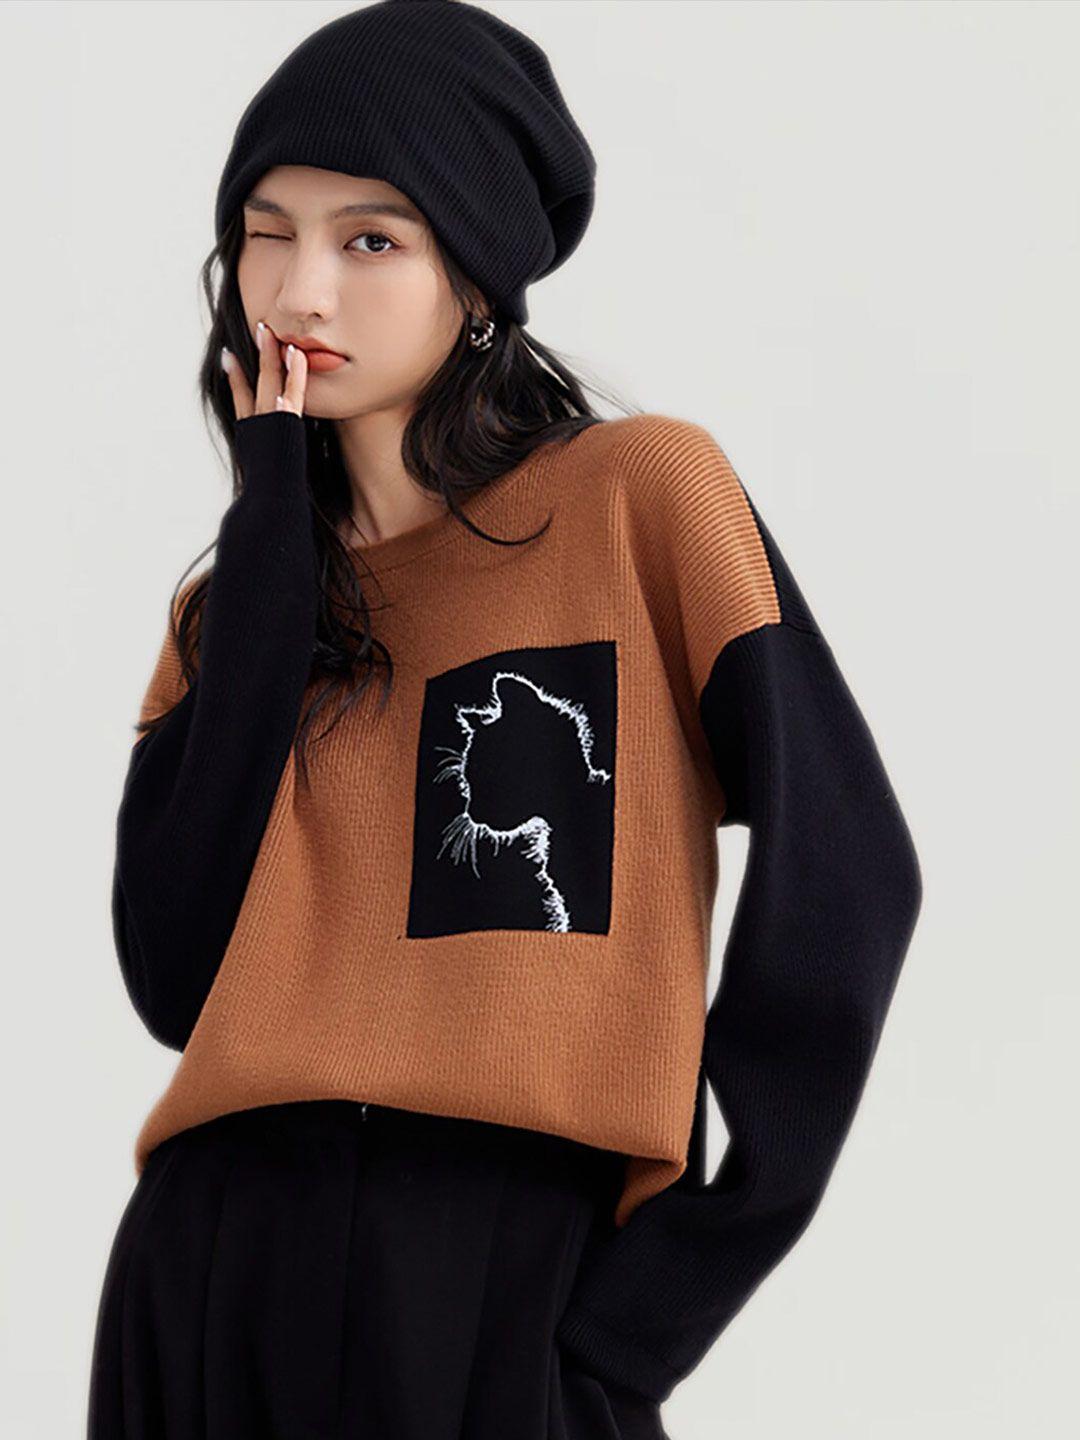 jc-collection-graphic-printed-pullover-sweater